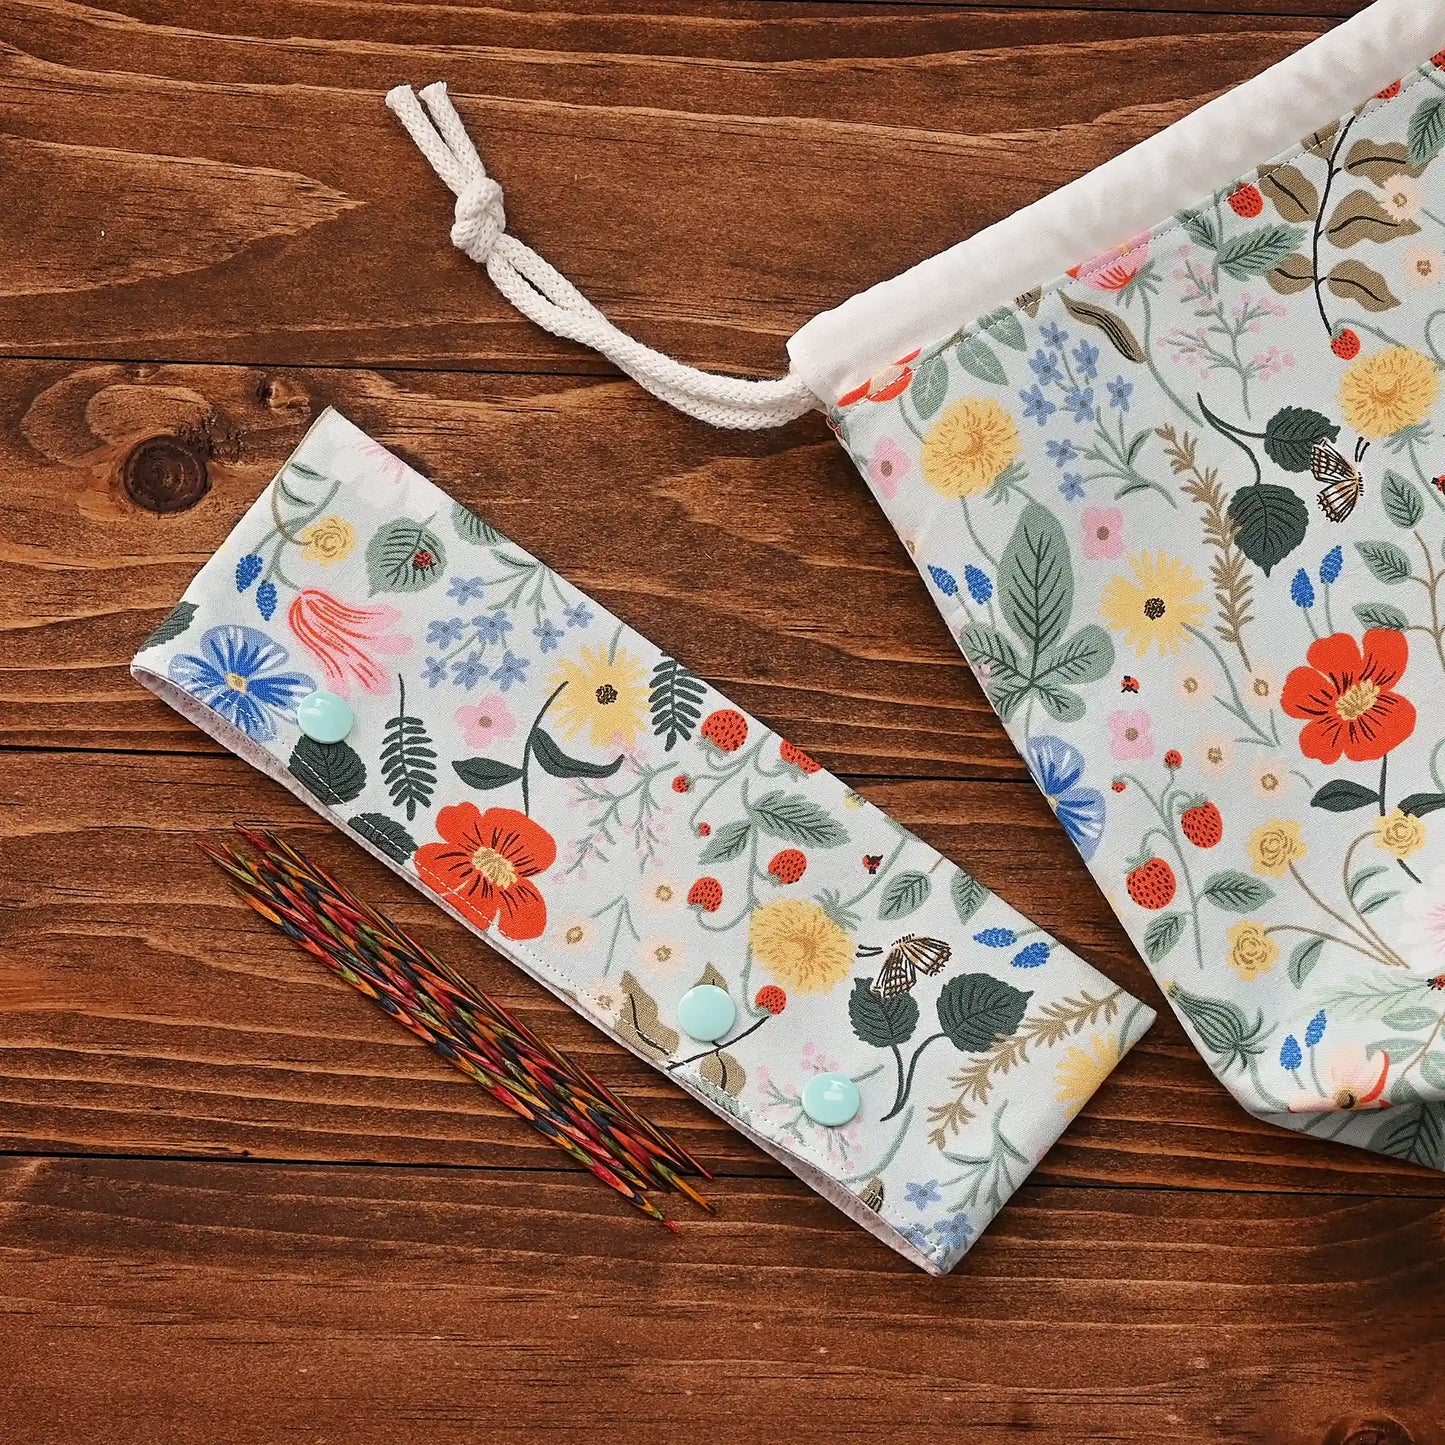 Drawstring Project Bag in Mint Strawberry Fields Fabric from Rifle Paper Co